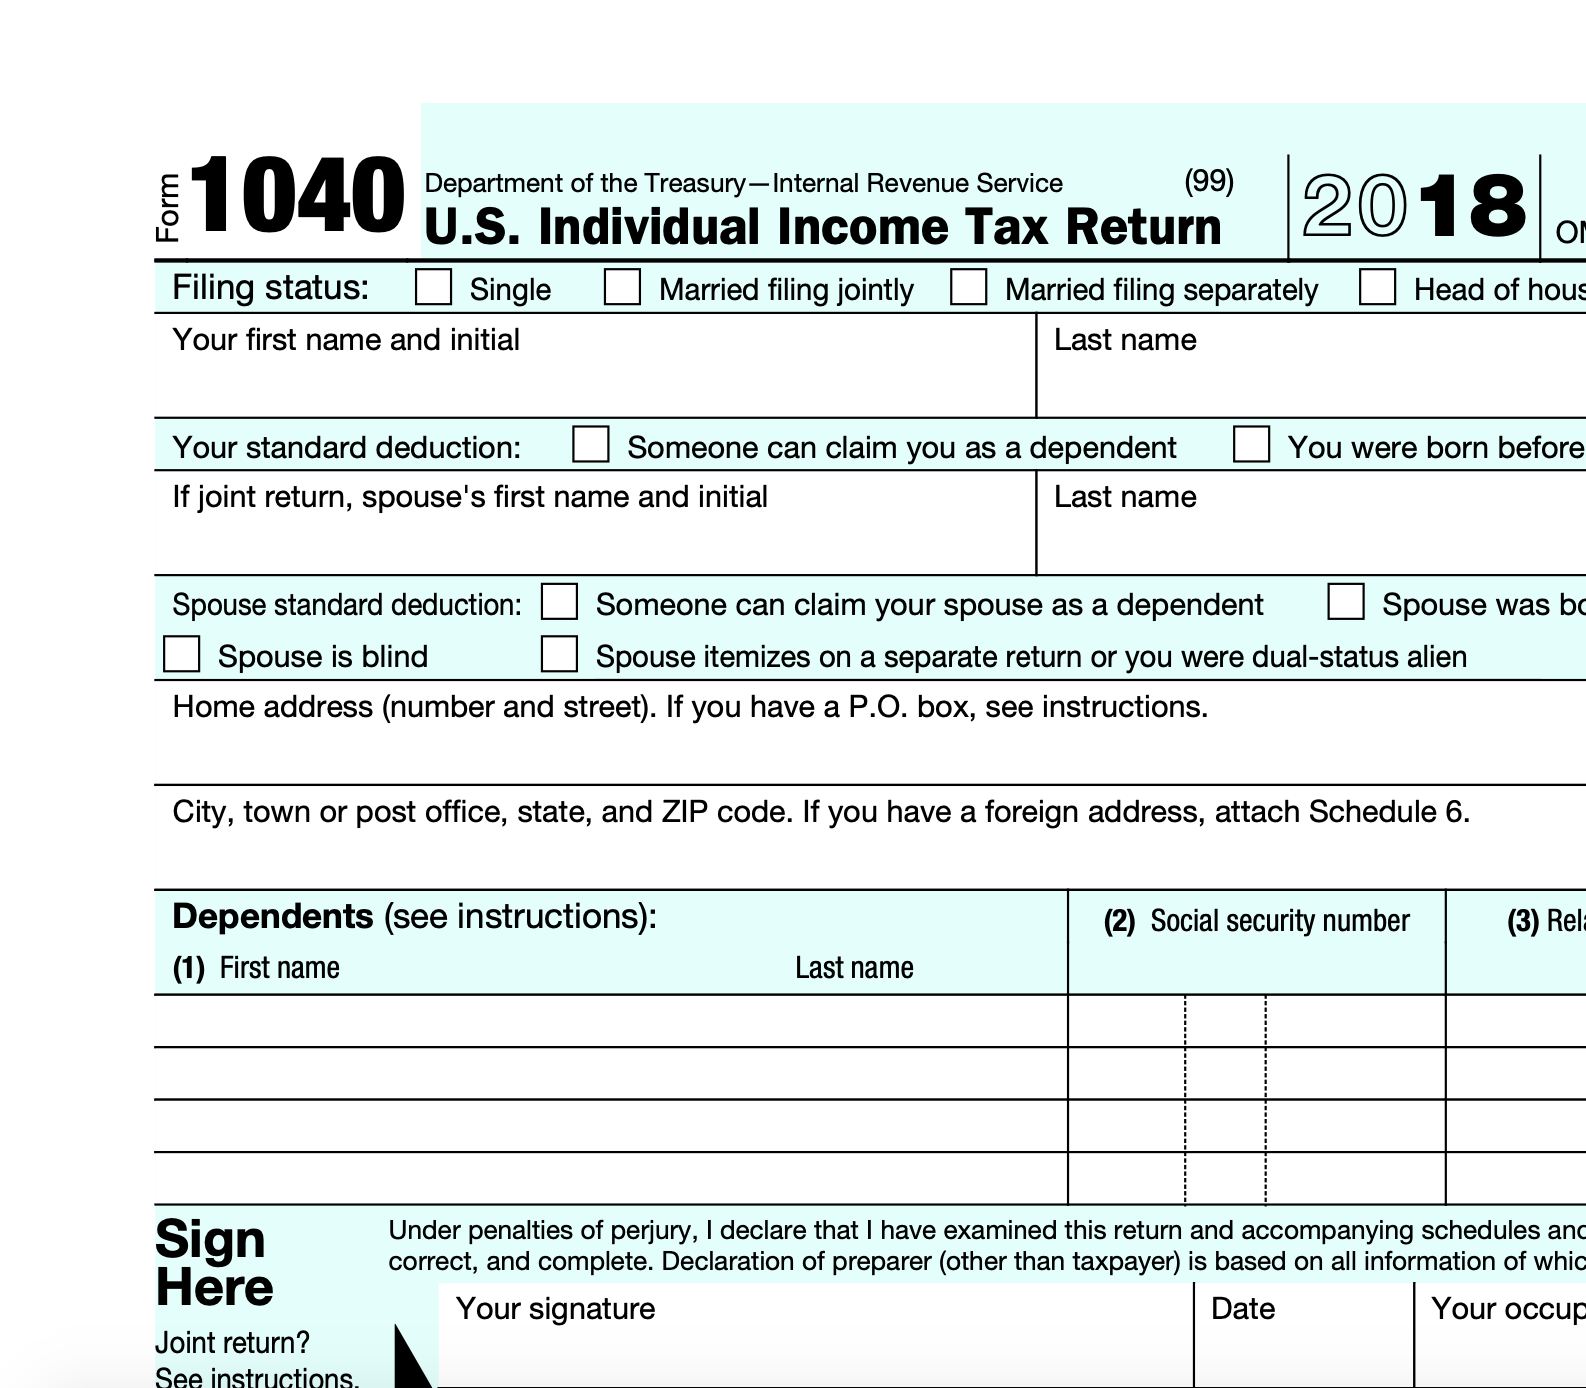 seniors-get-a-new-simplified-tax-form-for-2019-americans-care